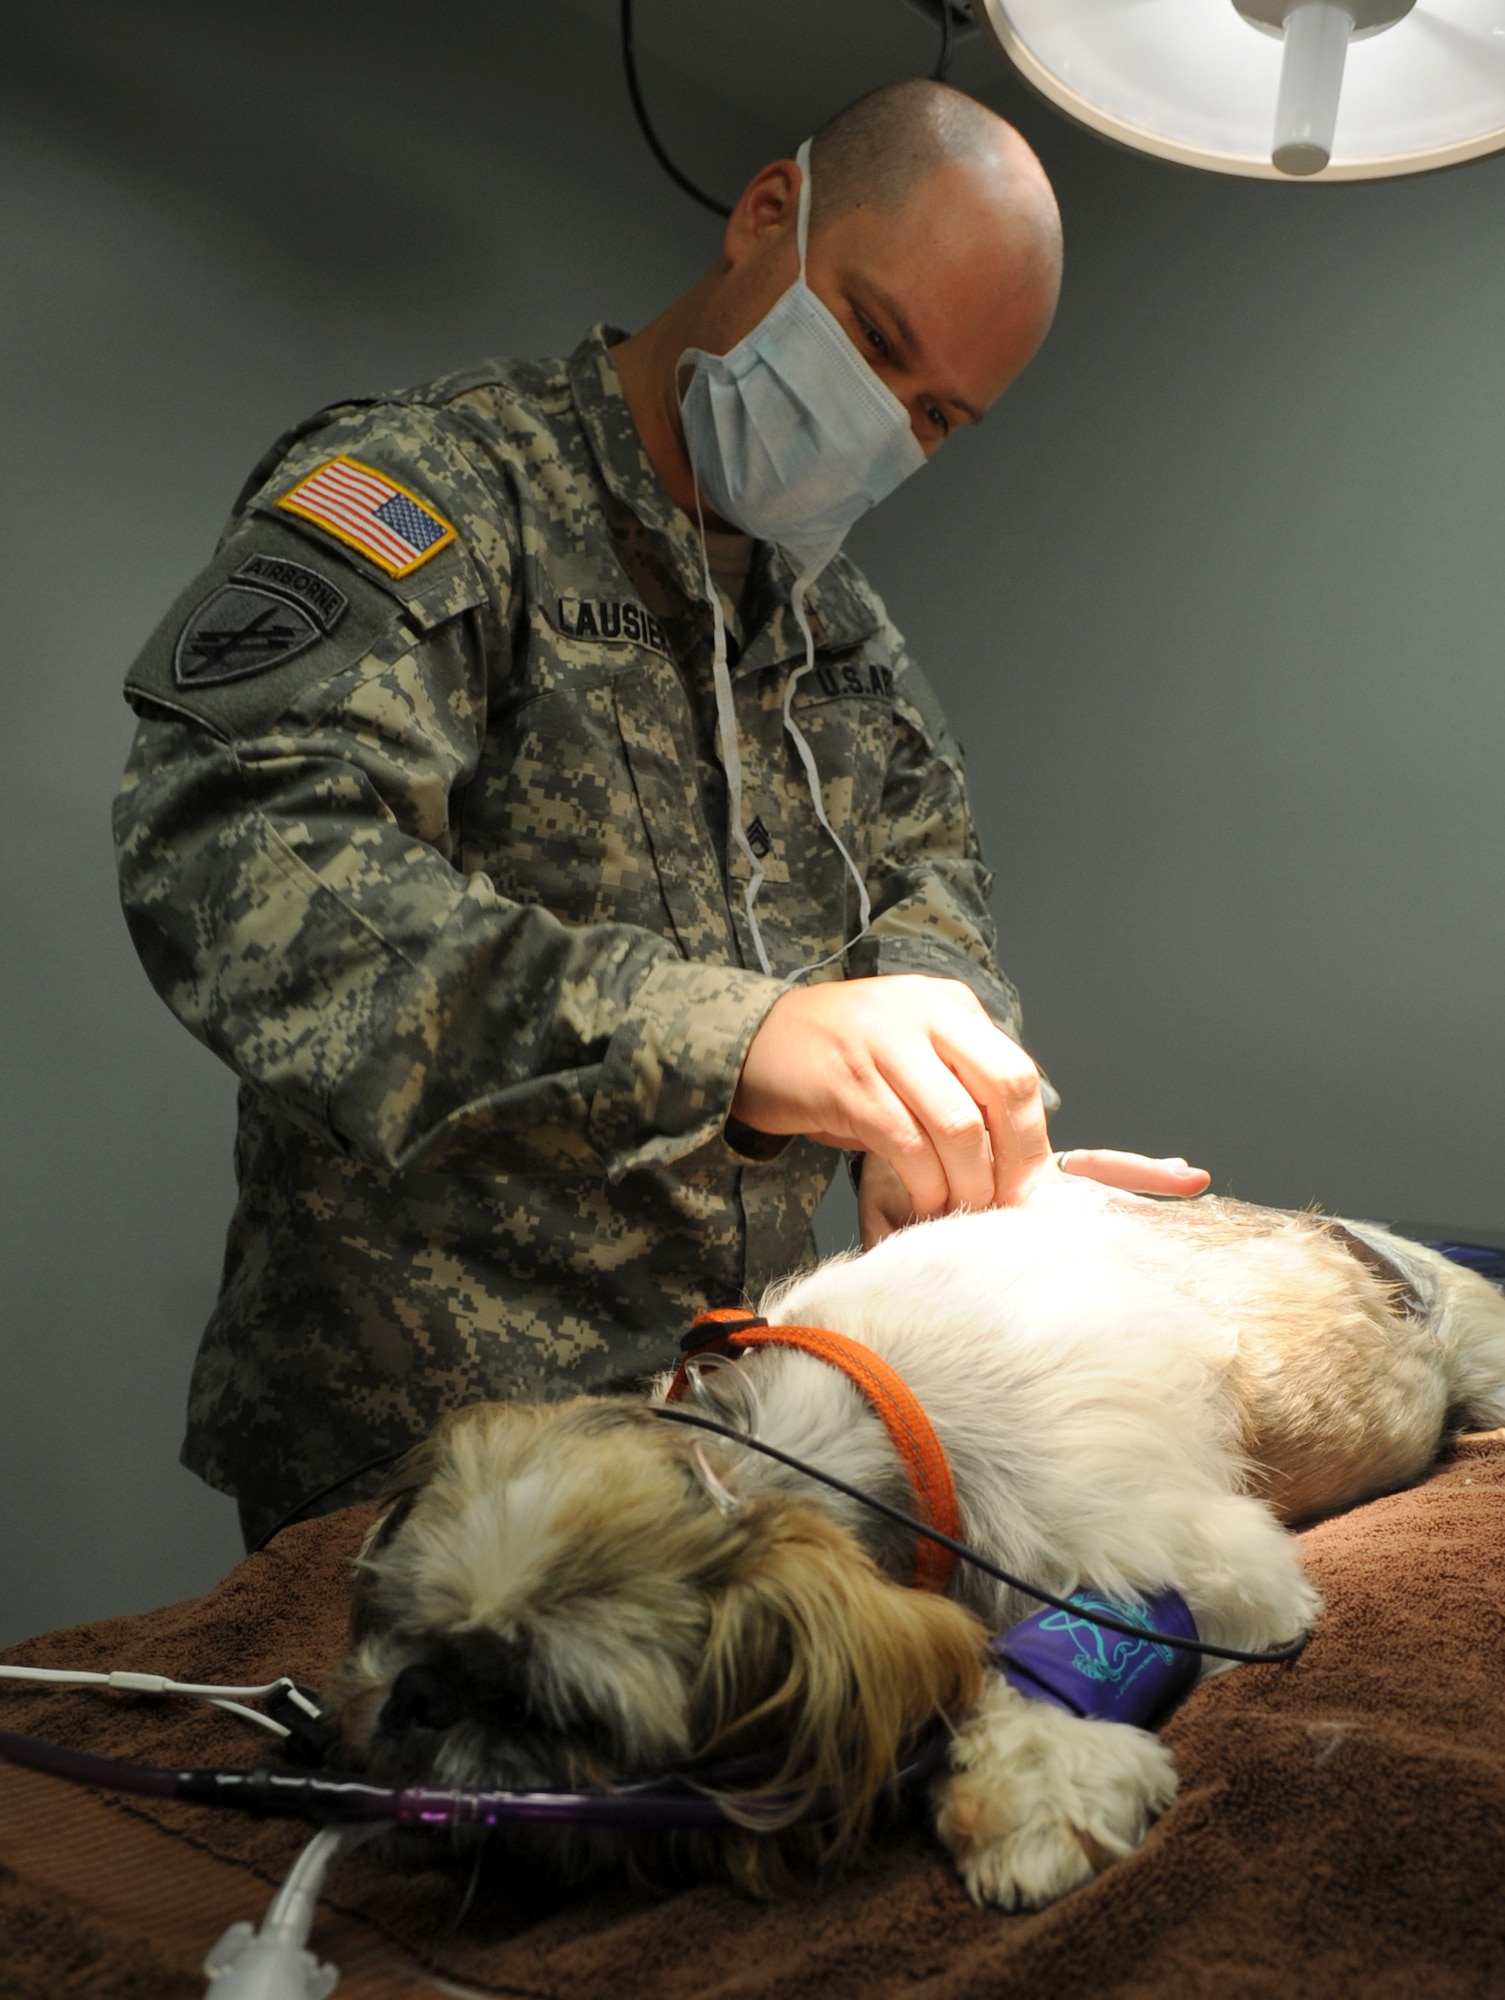 Army Staff Sgt. Travis Lausier, Veterinary Treatment Facility noncommissioned officer in charge, sanitizes a dog’s back to prepare for surgery Aug. 22, 2013, at Little Rock Air Force Base, Ark. The clinic performs routine procedures such as spays, neuters, growth removals and dental work. (U.S. Air Force photo by Staff Sgt. Caleb Pierce)